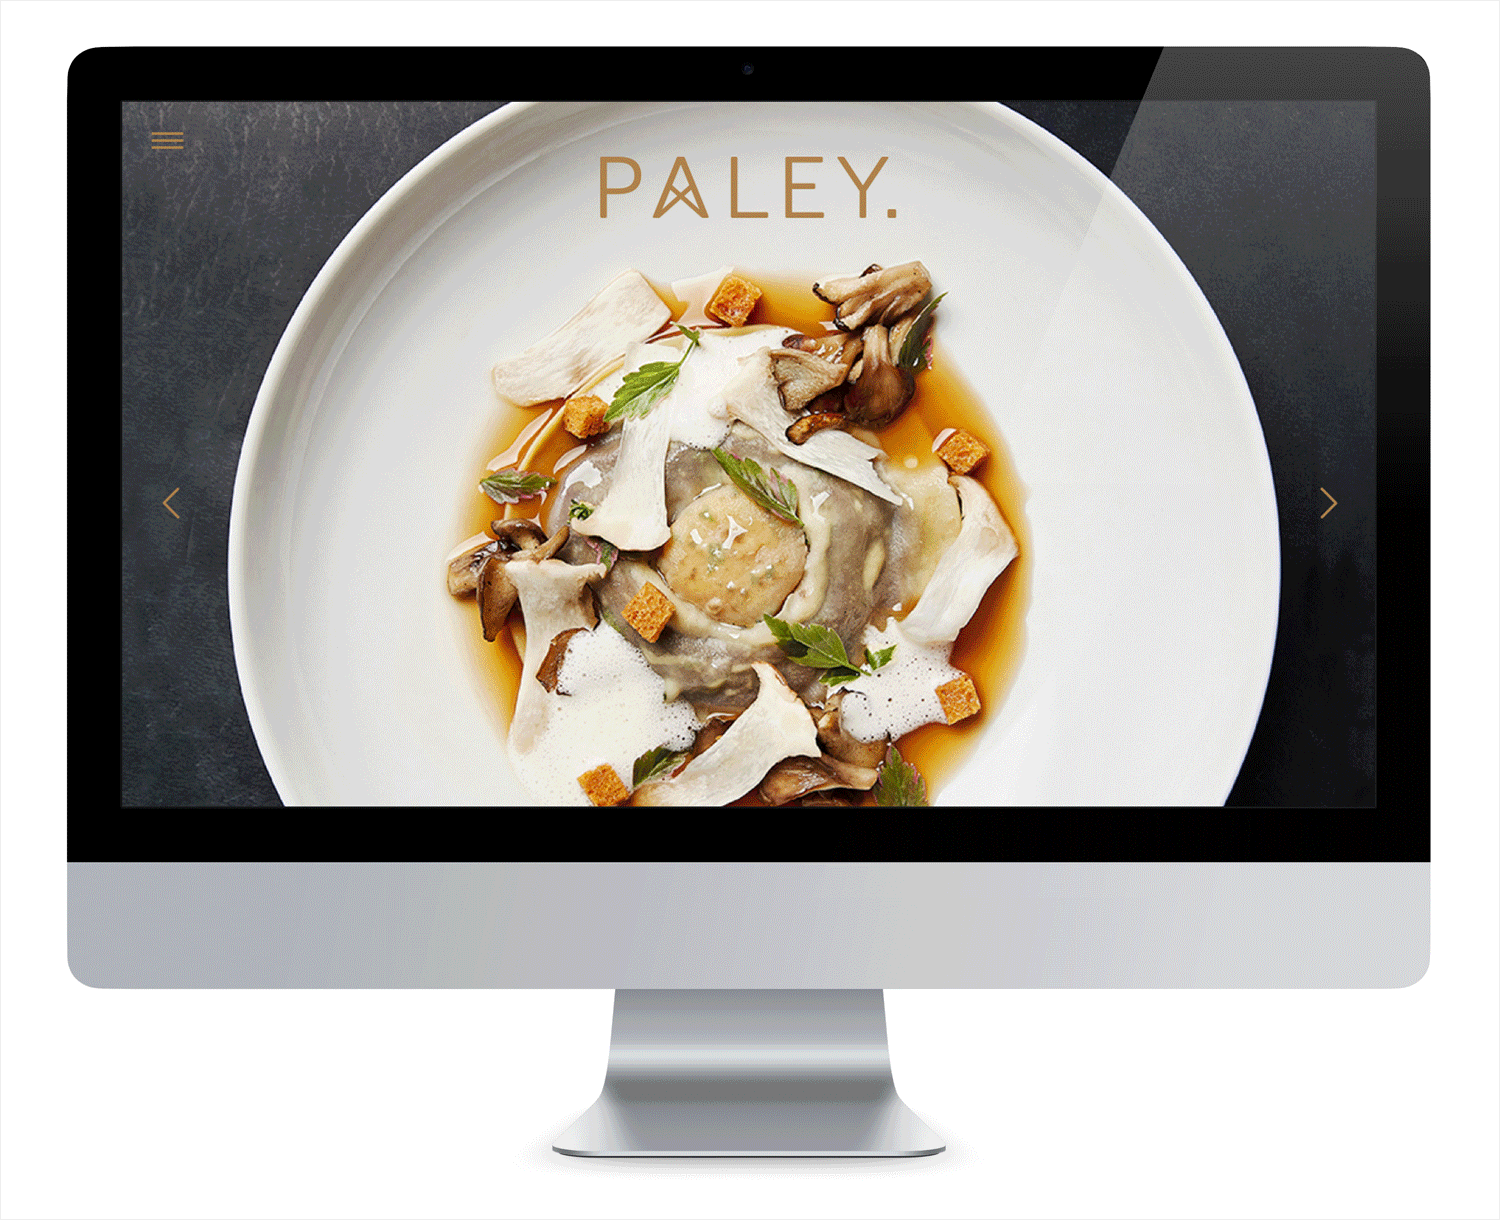 Brand identity and website for Los Angeles restaurant Paley designed by Mucca, United States